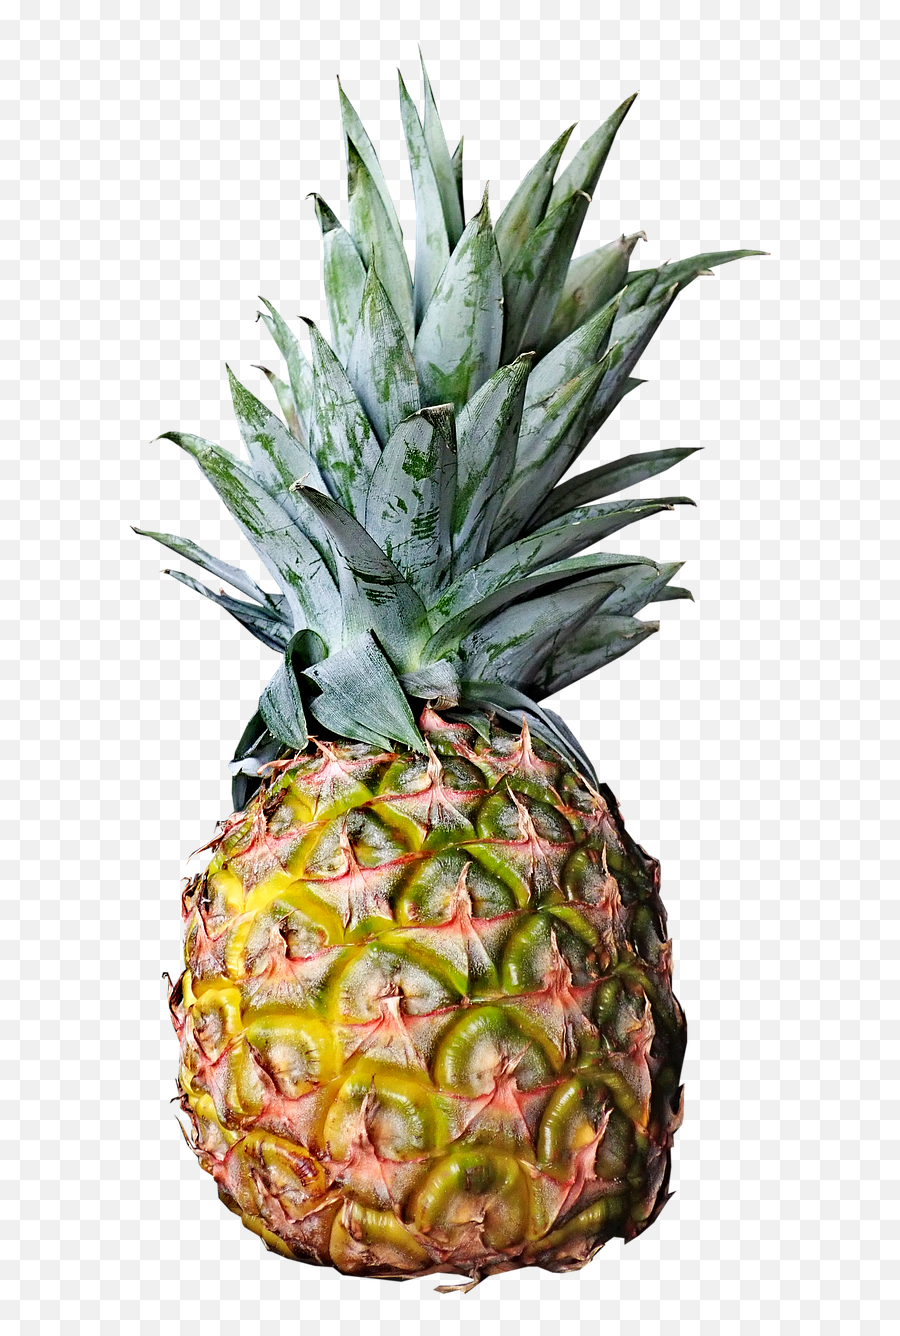 Download Free Photo Of Pineapple Fresh Fruit Tropical - Hd Fruit Image Png Ananas,Pineapple Slice Icon